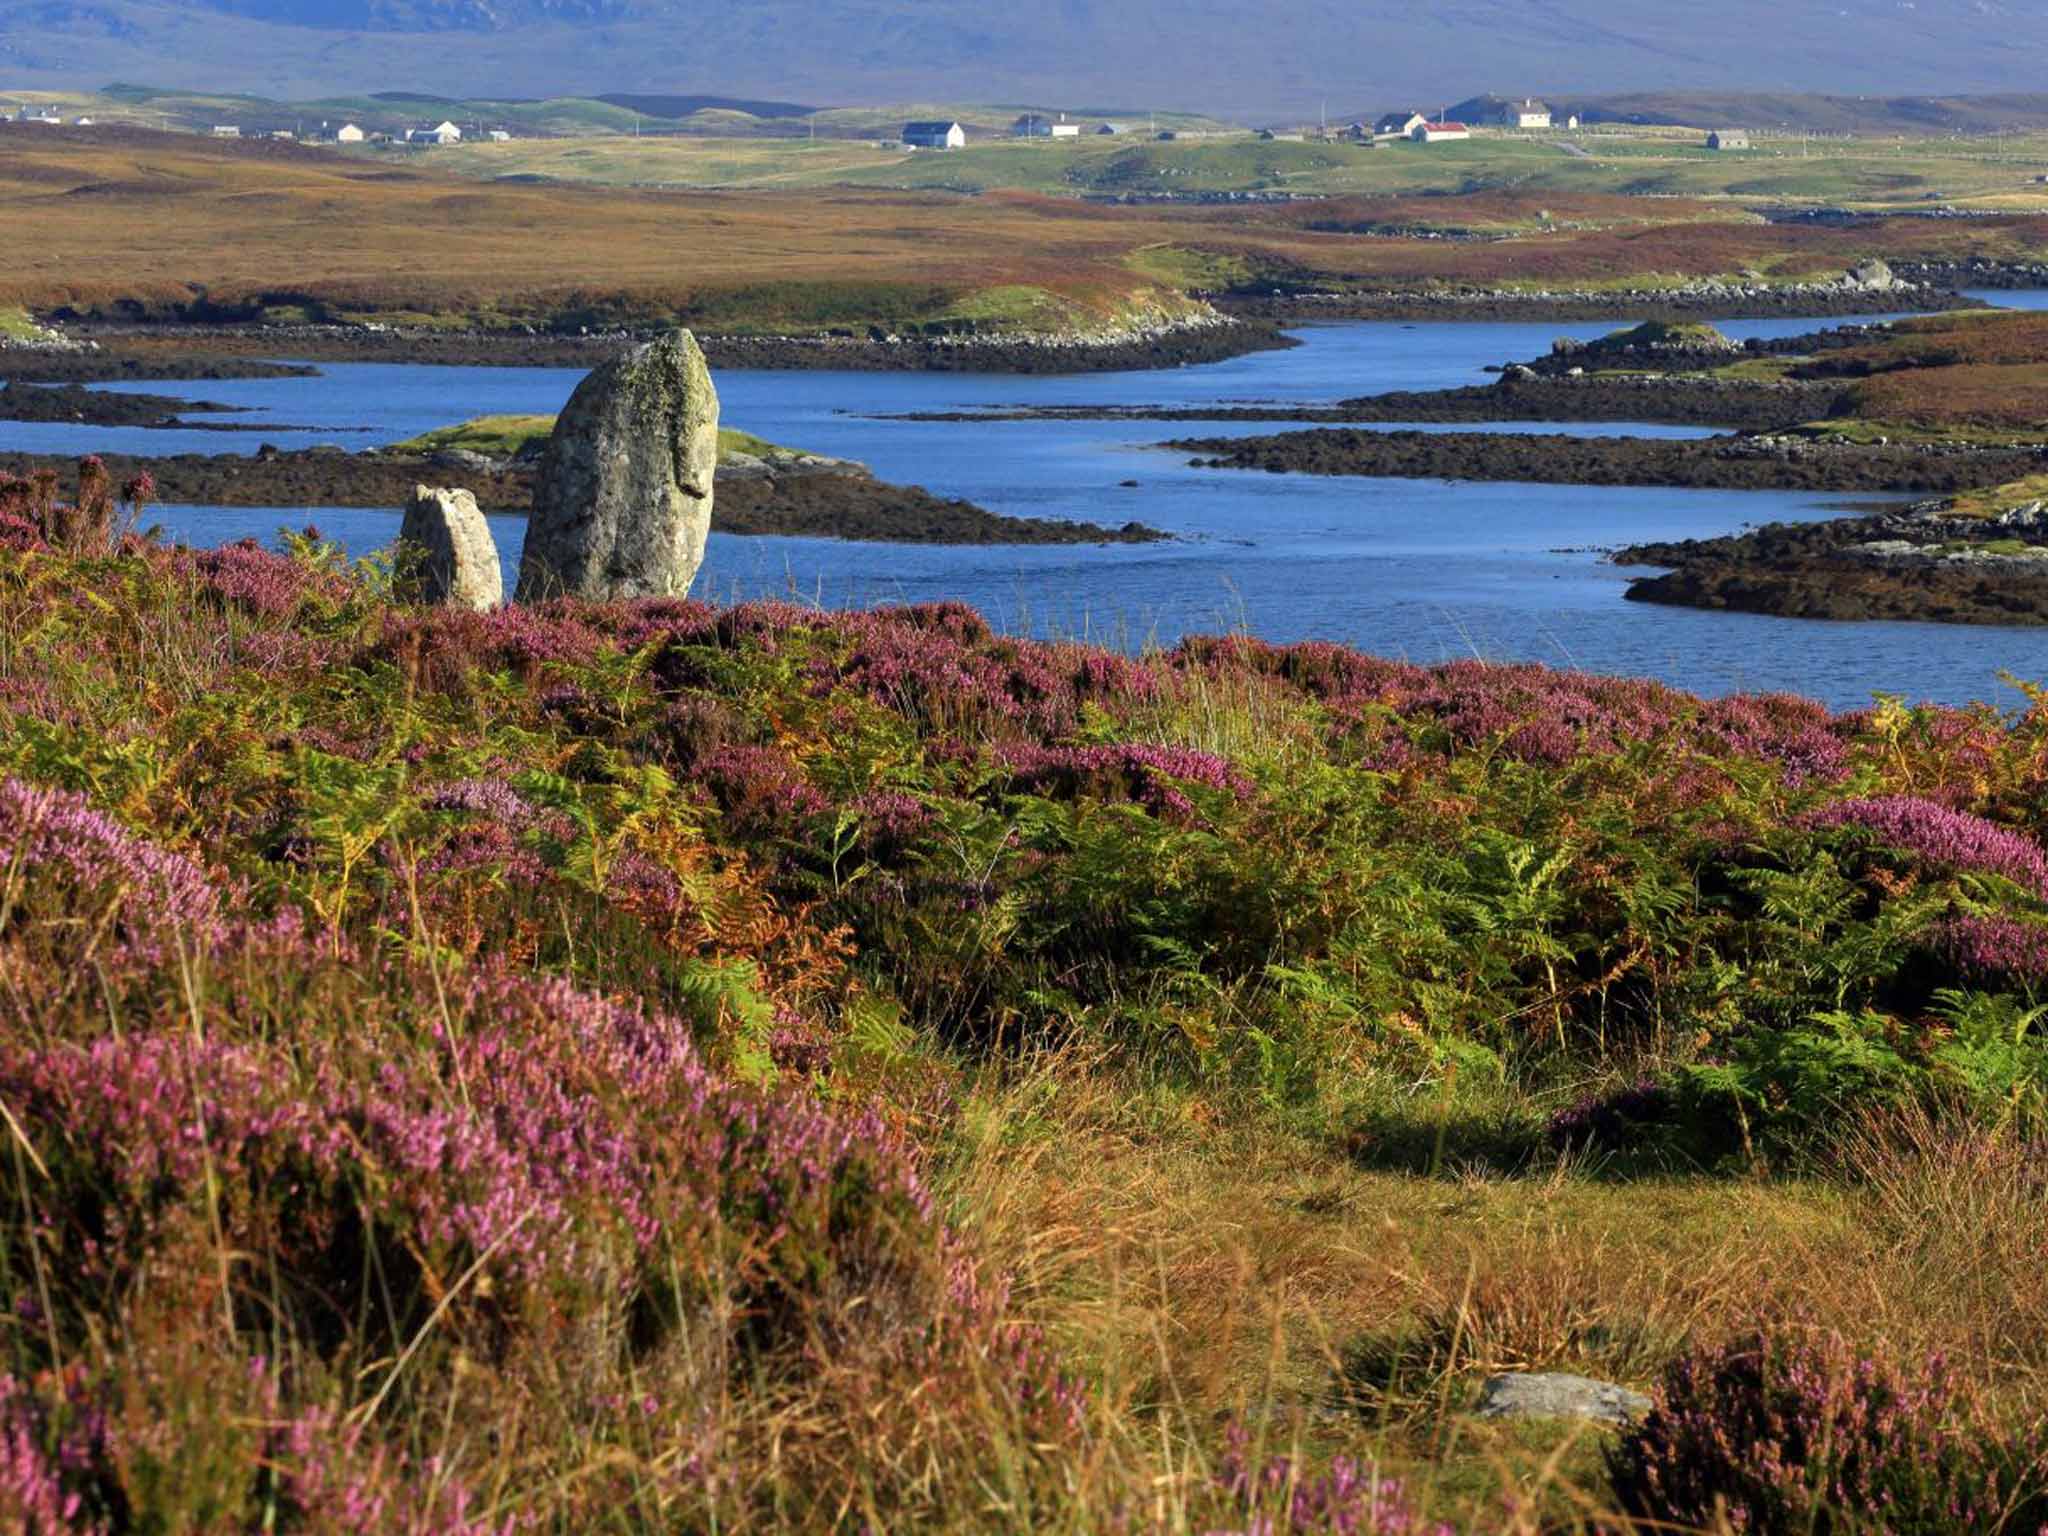 Heather forecast: the island of North Uist in the Outer Hebrides